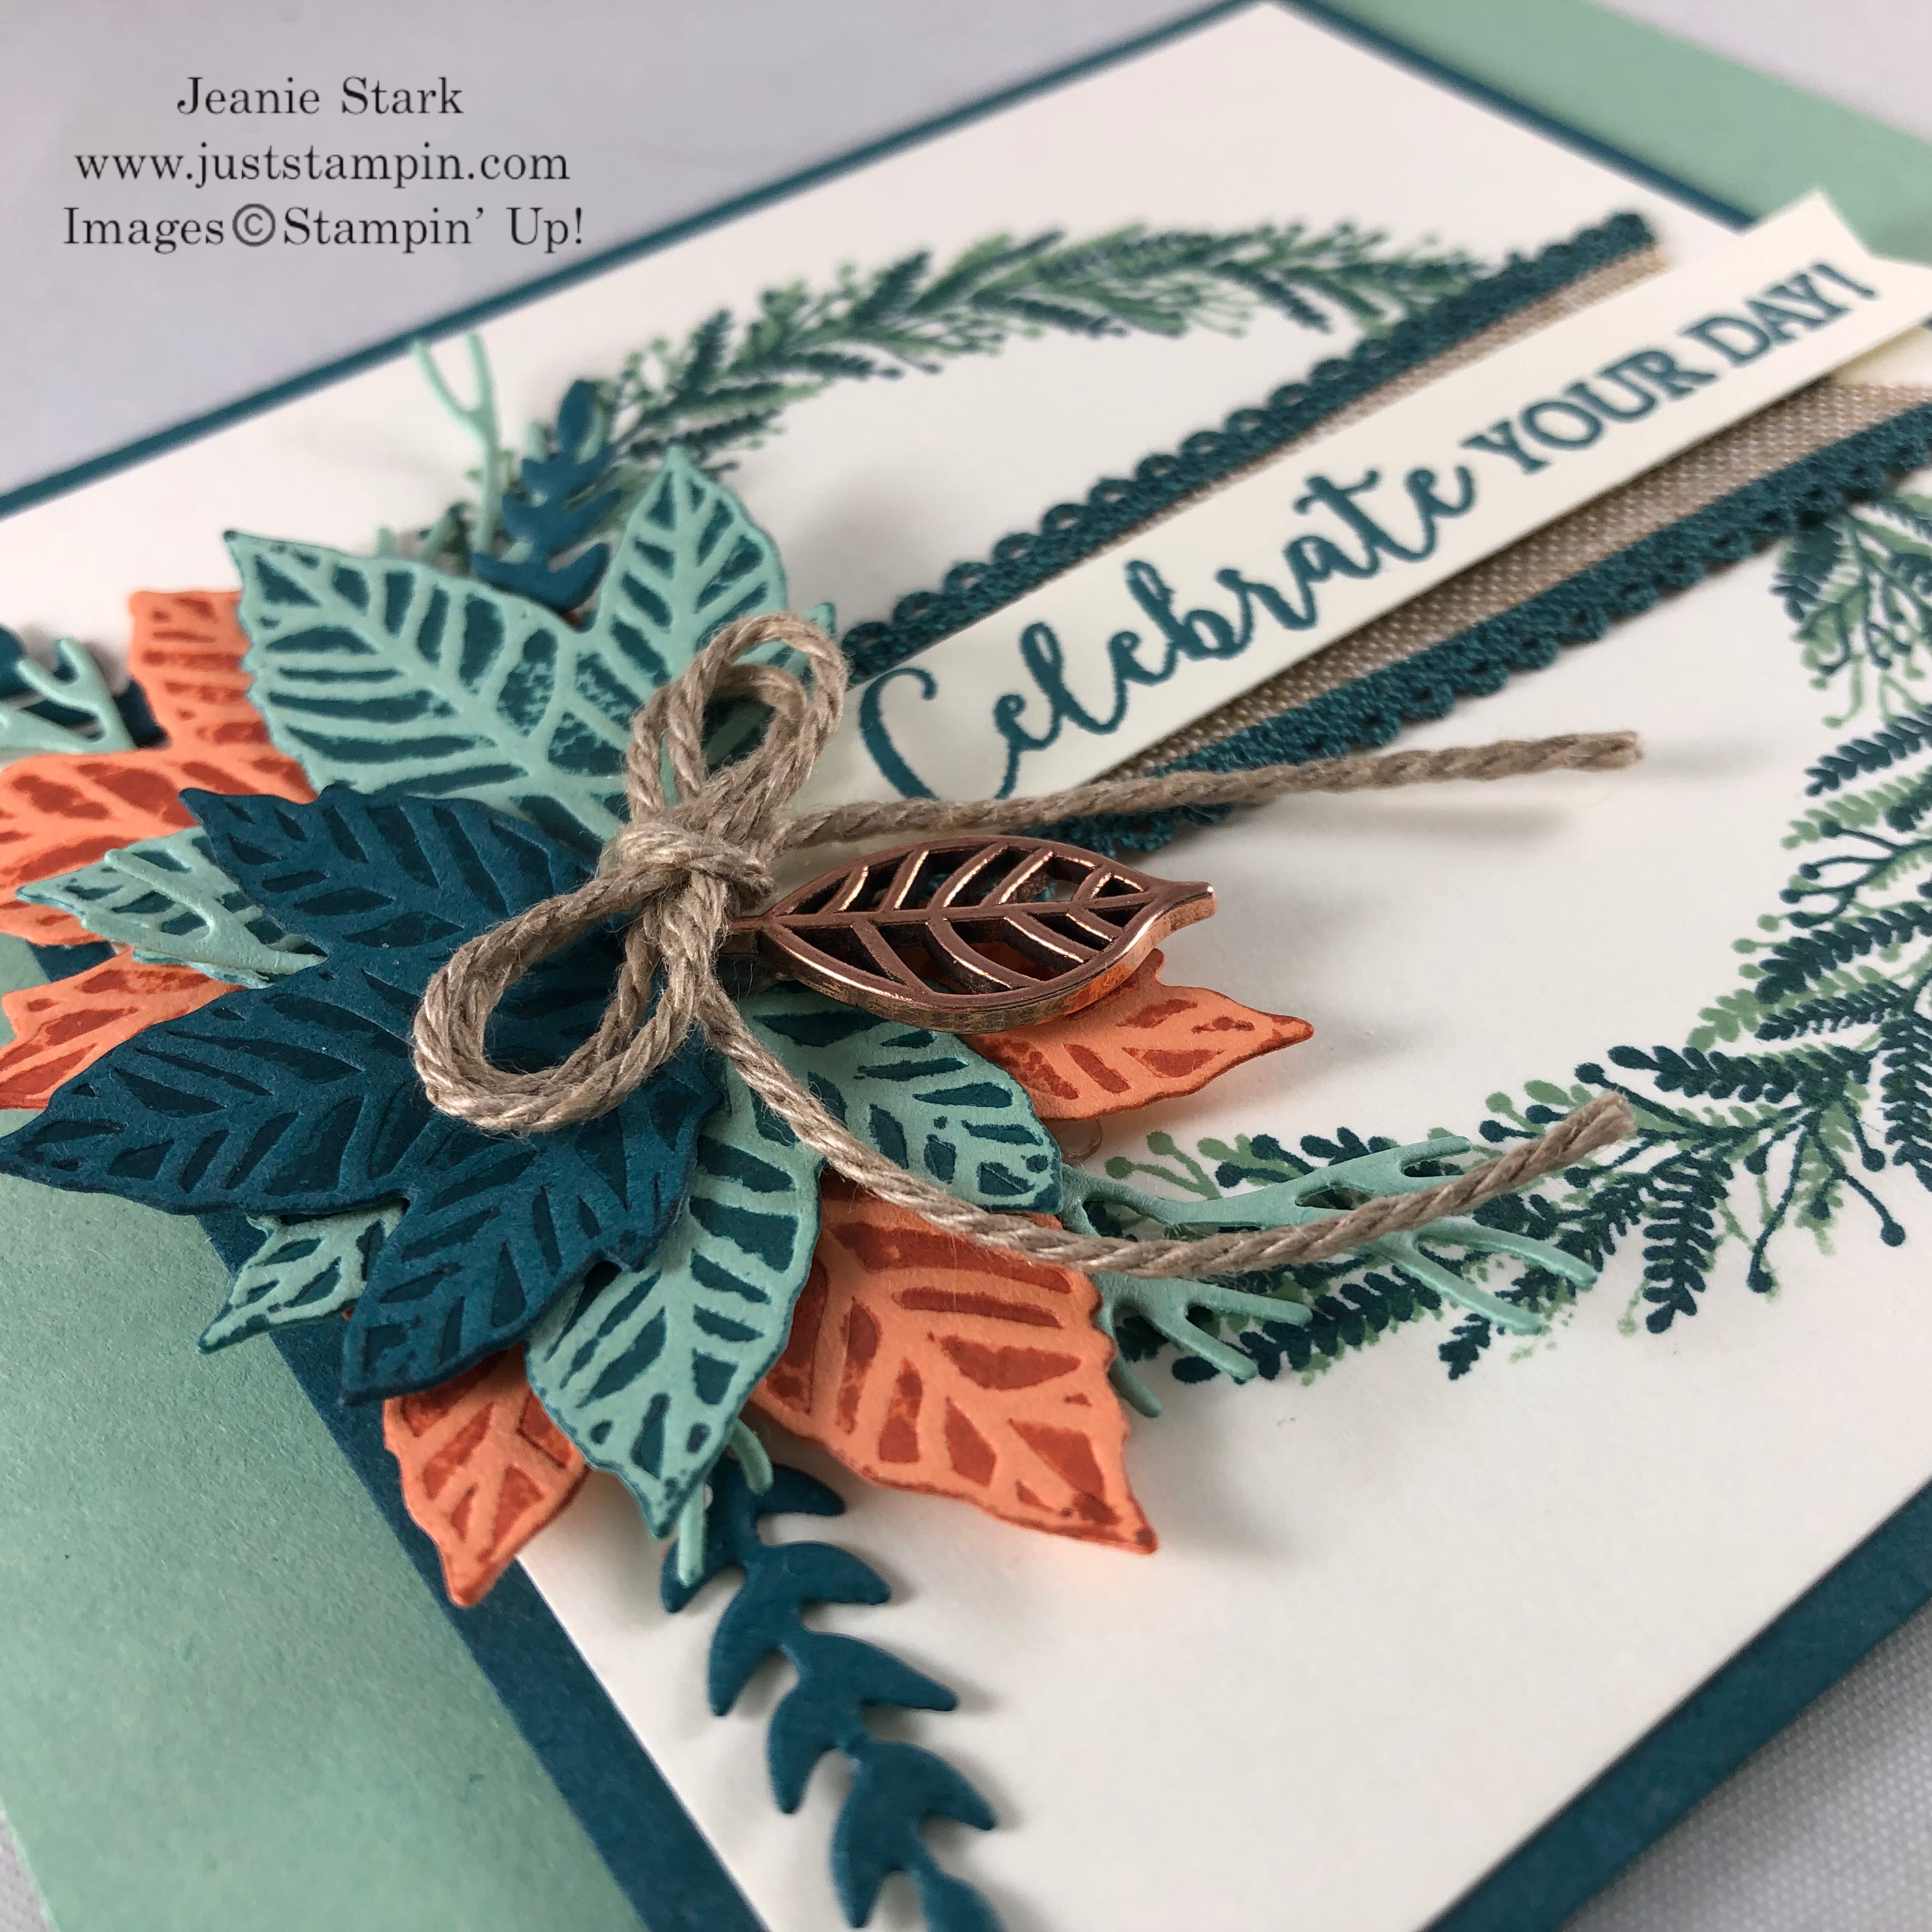 Stampin' Up Gathered Leaves Dies and Tidings All Around Wreath for a fun fold fall birthday card idea - Jeanie Stark StampinUp